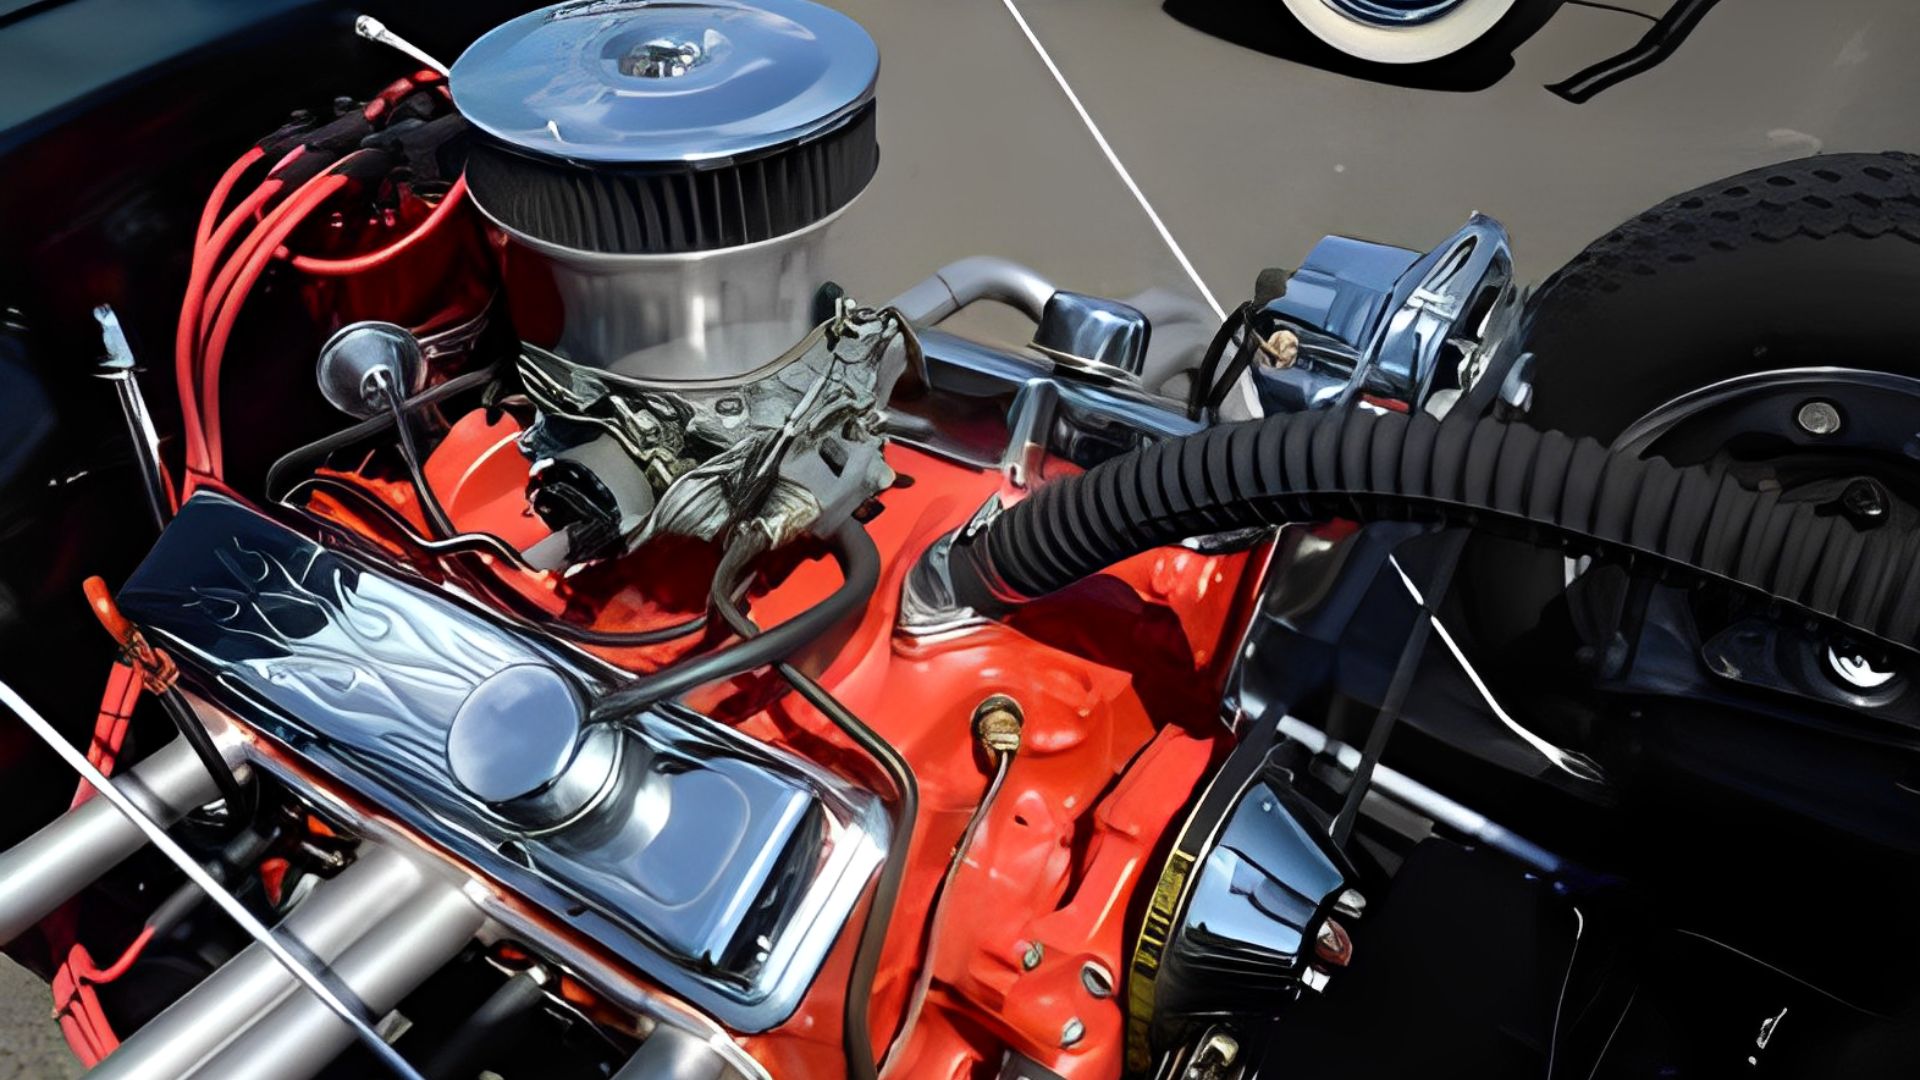 How to start a carbureted engine